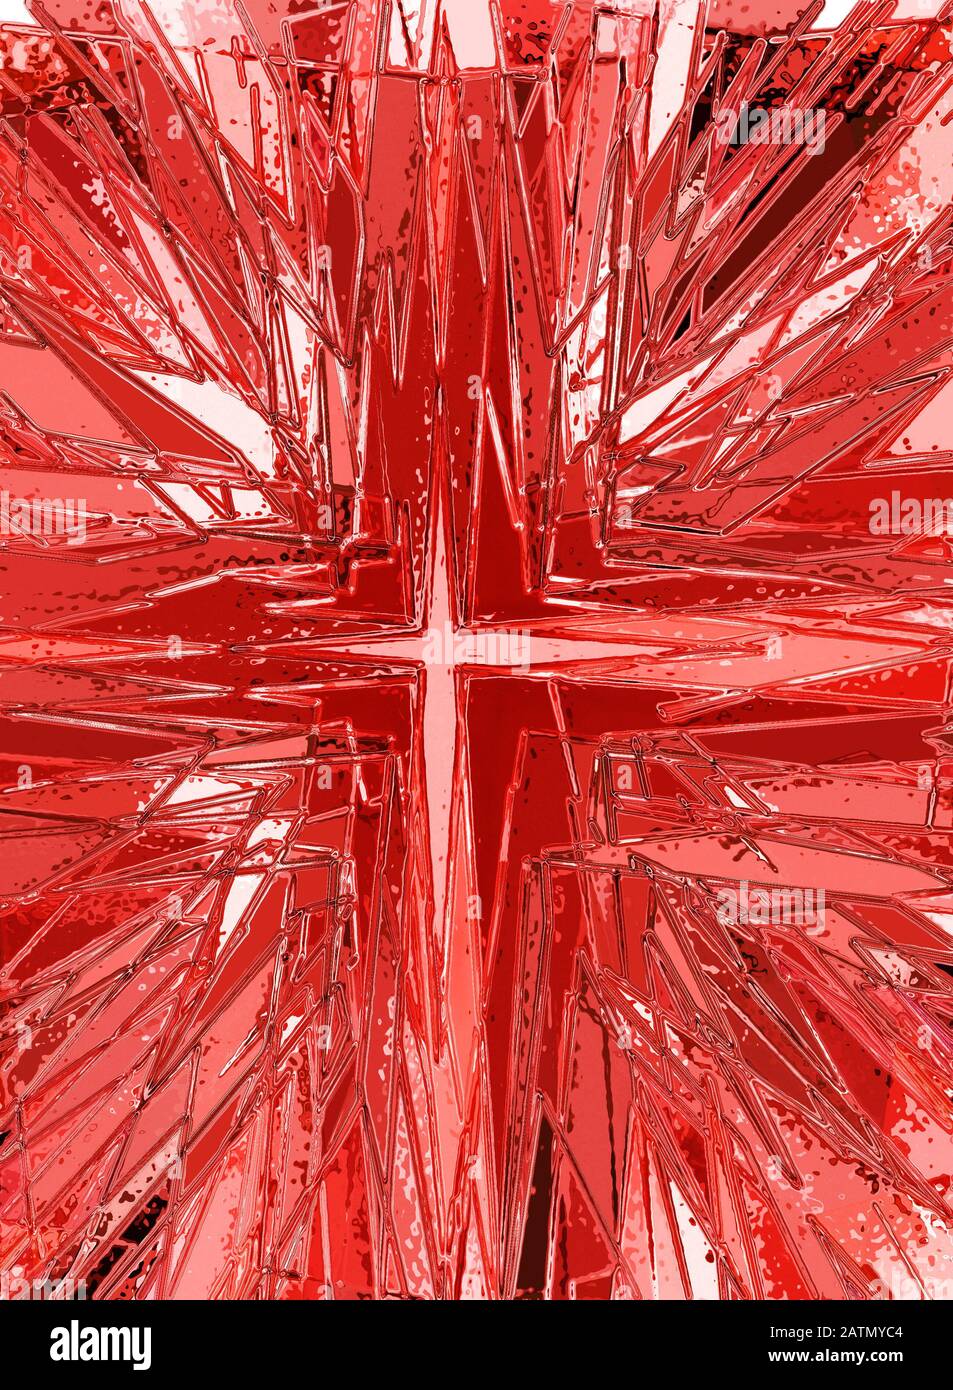 Red religious cross stained glass illustration Stock Photo